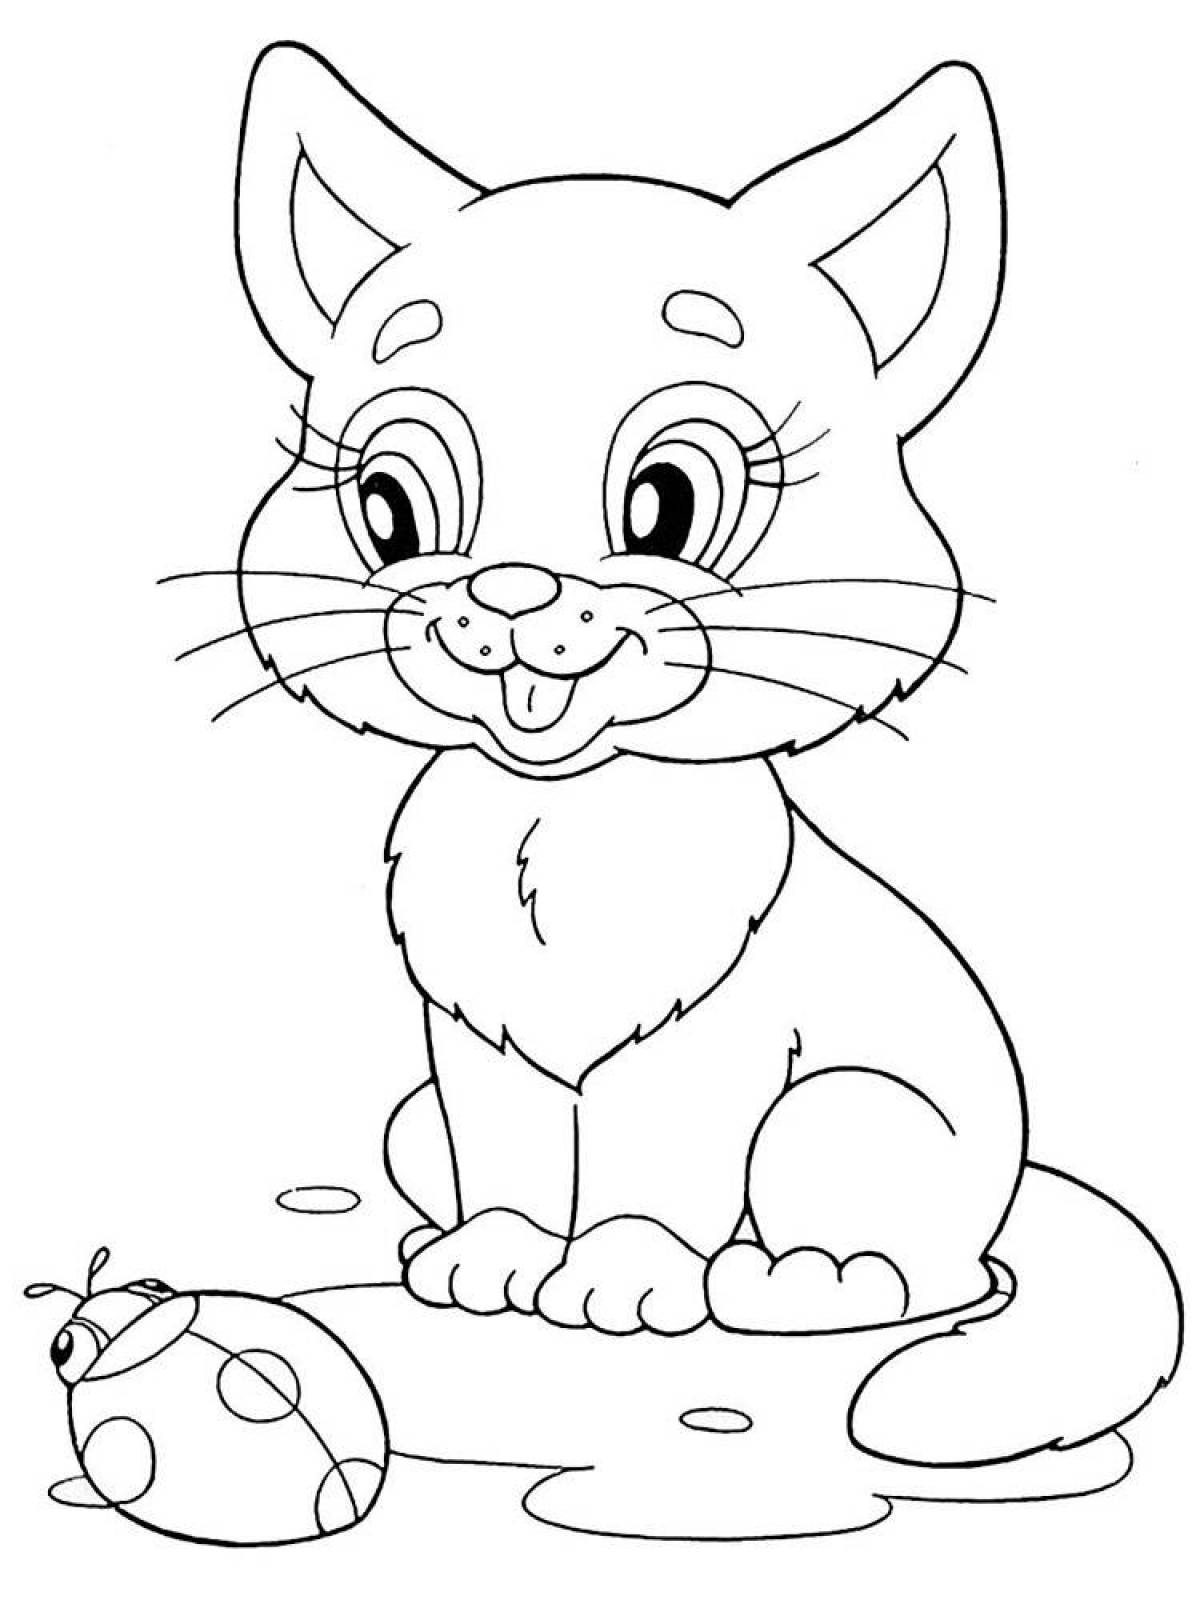 Coloring pages for children 4-5 years old animals